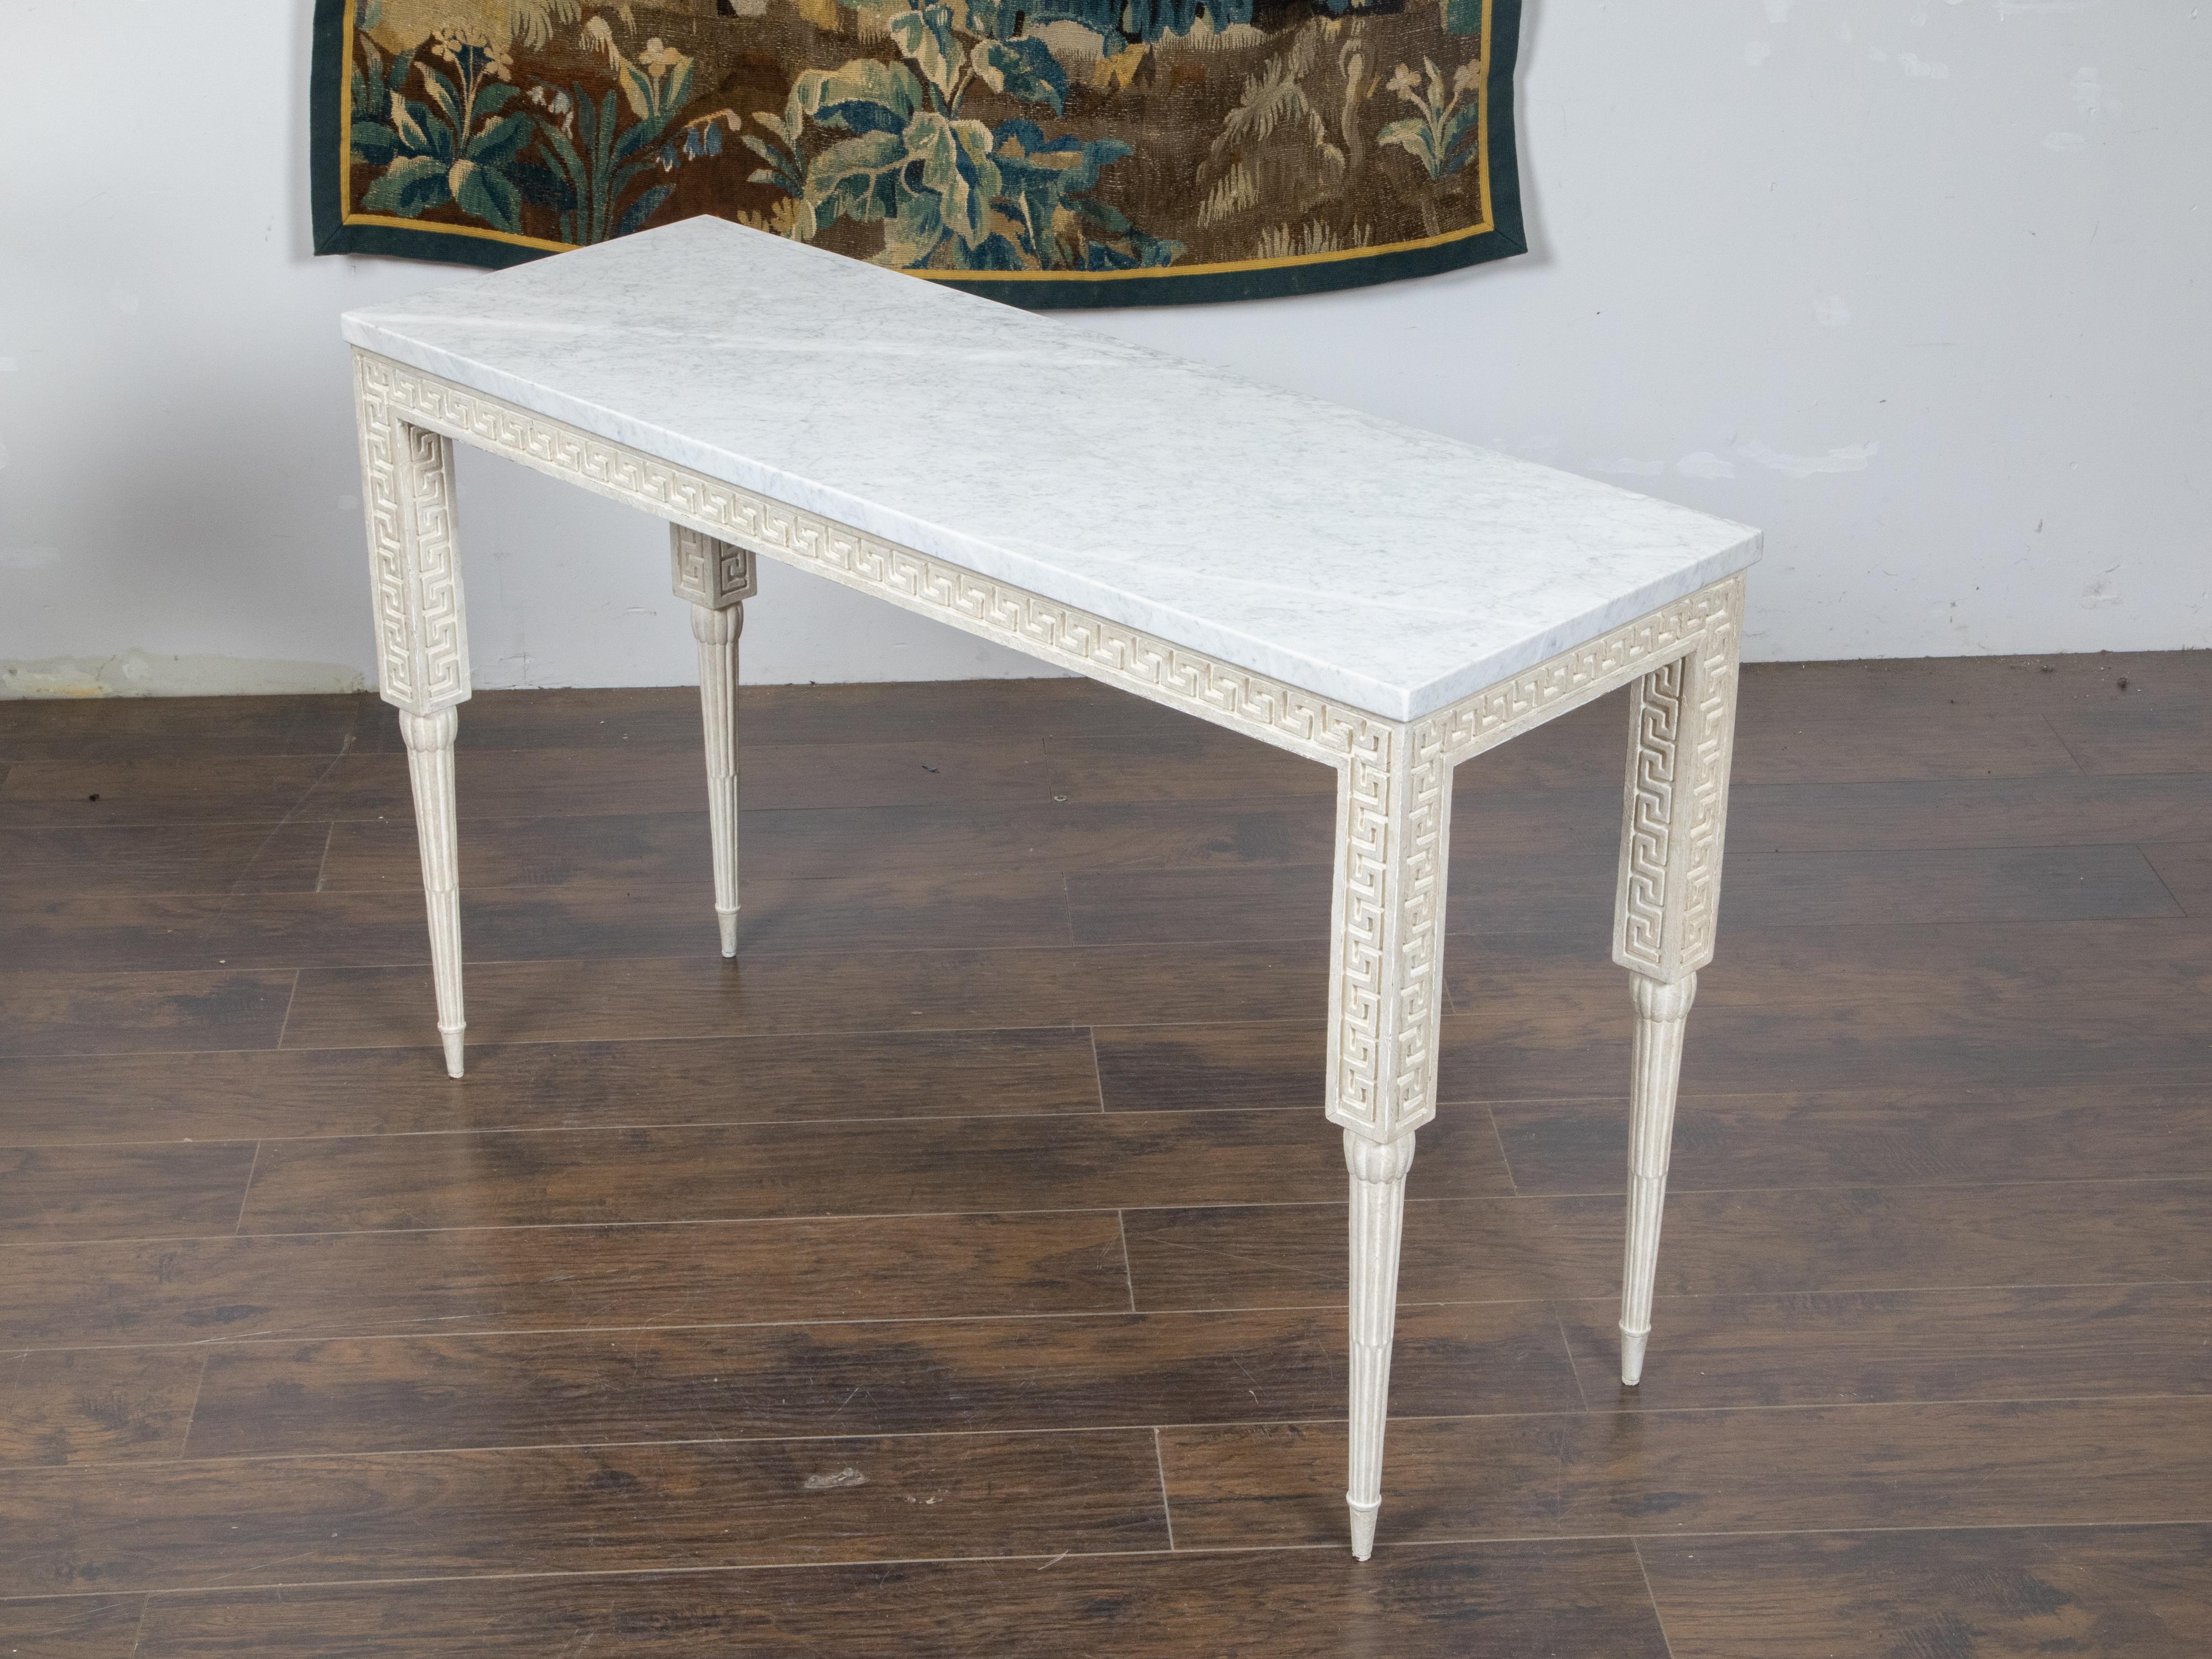 Italian Midcentury Console Table with White Marble Top and Carved Greek Key In Good Condition For Sale In Atlanta, GA